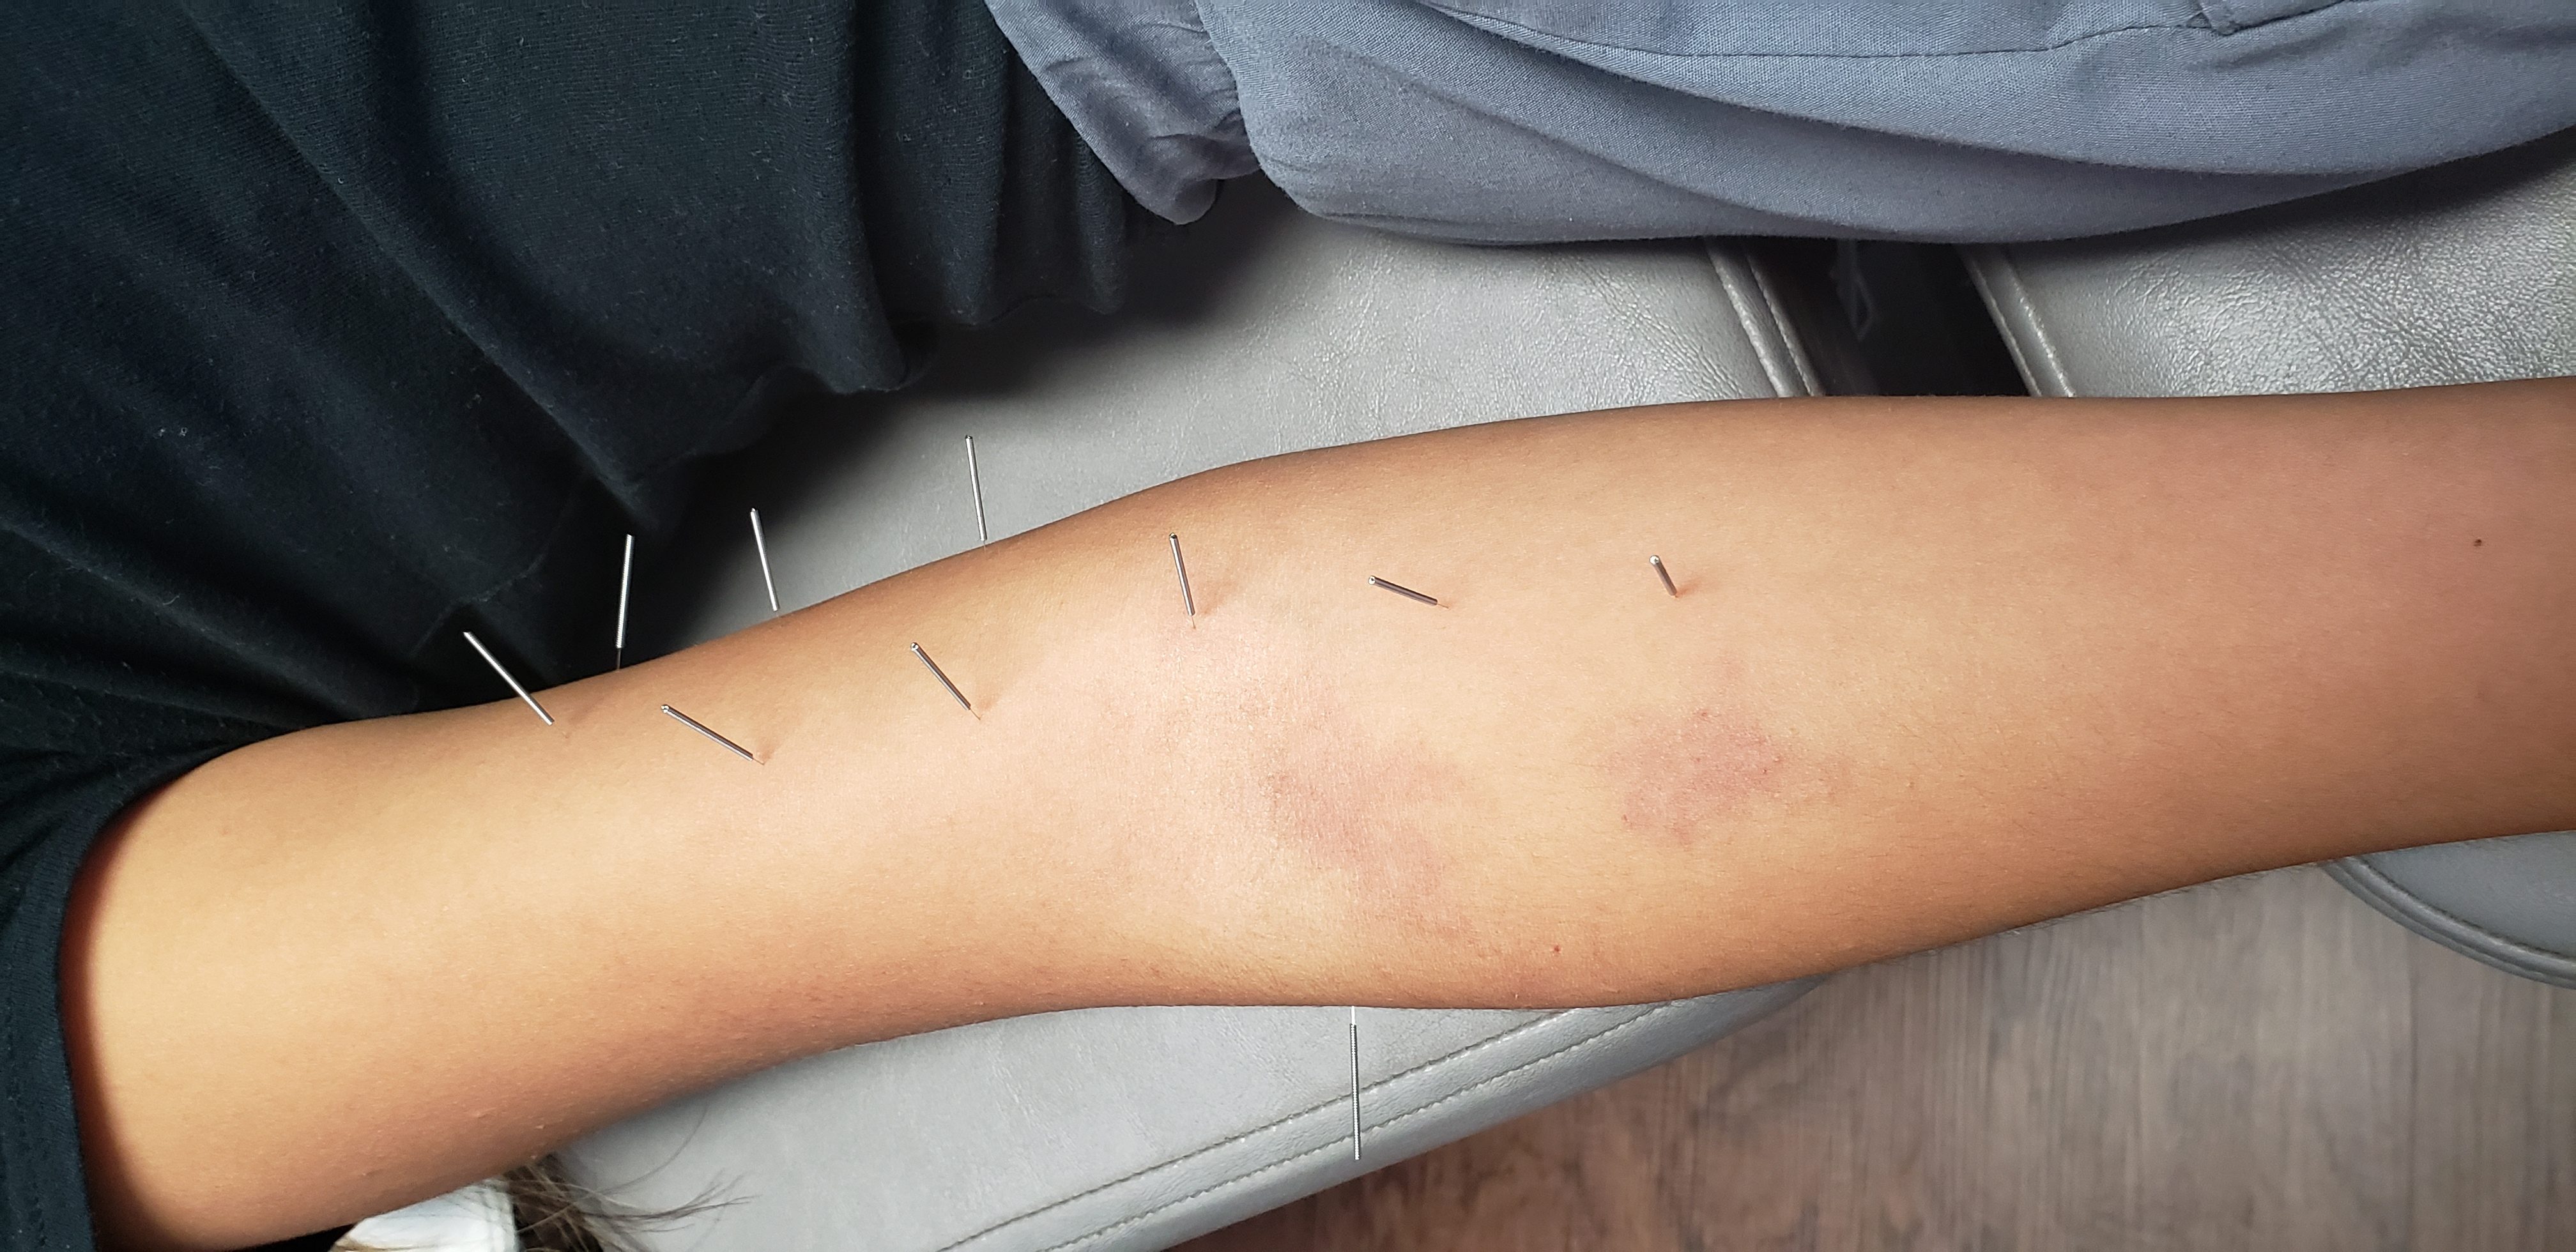 http://www.synergychiropractichouston.com/wp-content/uploads/2019/08/Dry-Needling-and-Arm-Pain-at-Synergy-Chiropractic-of-Houston-e1566590125208.jpg